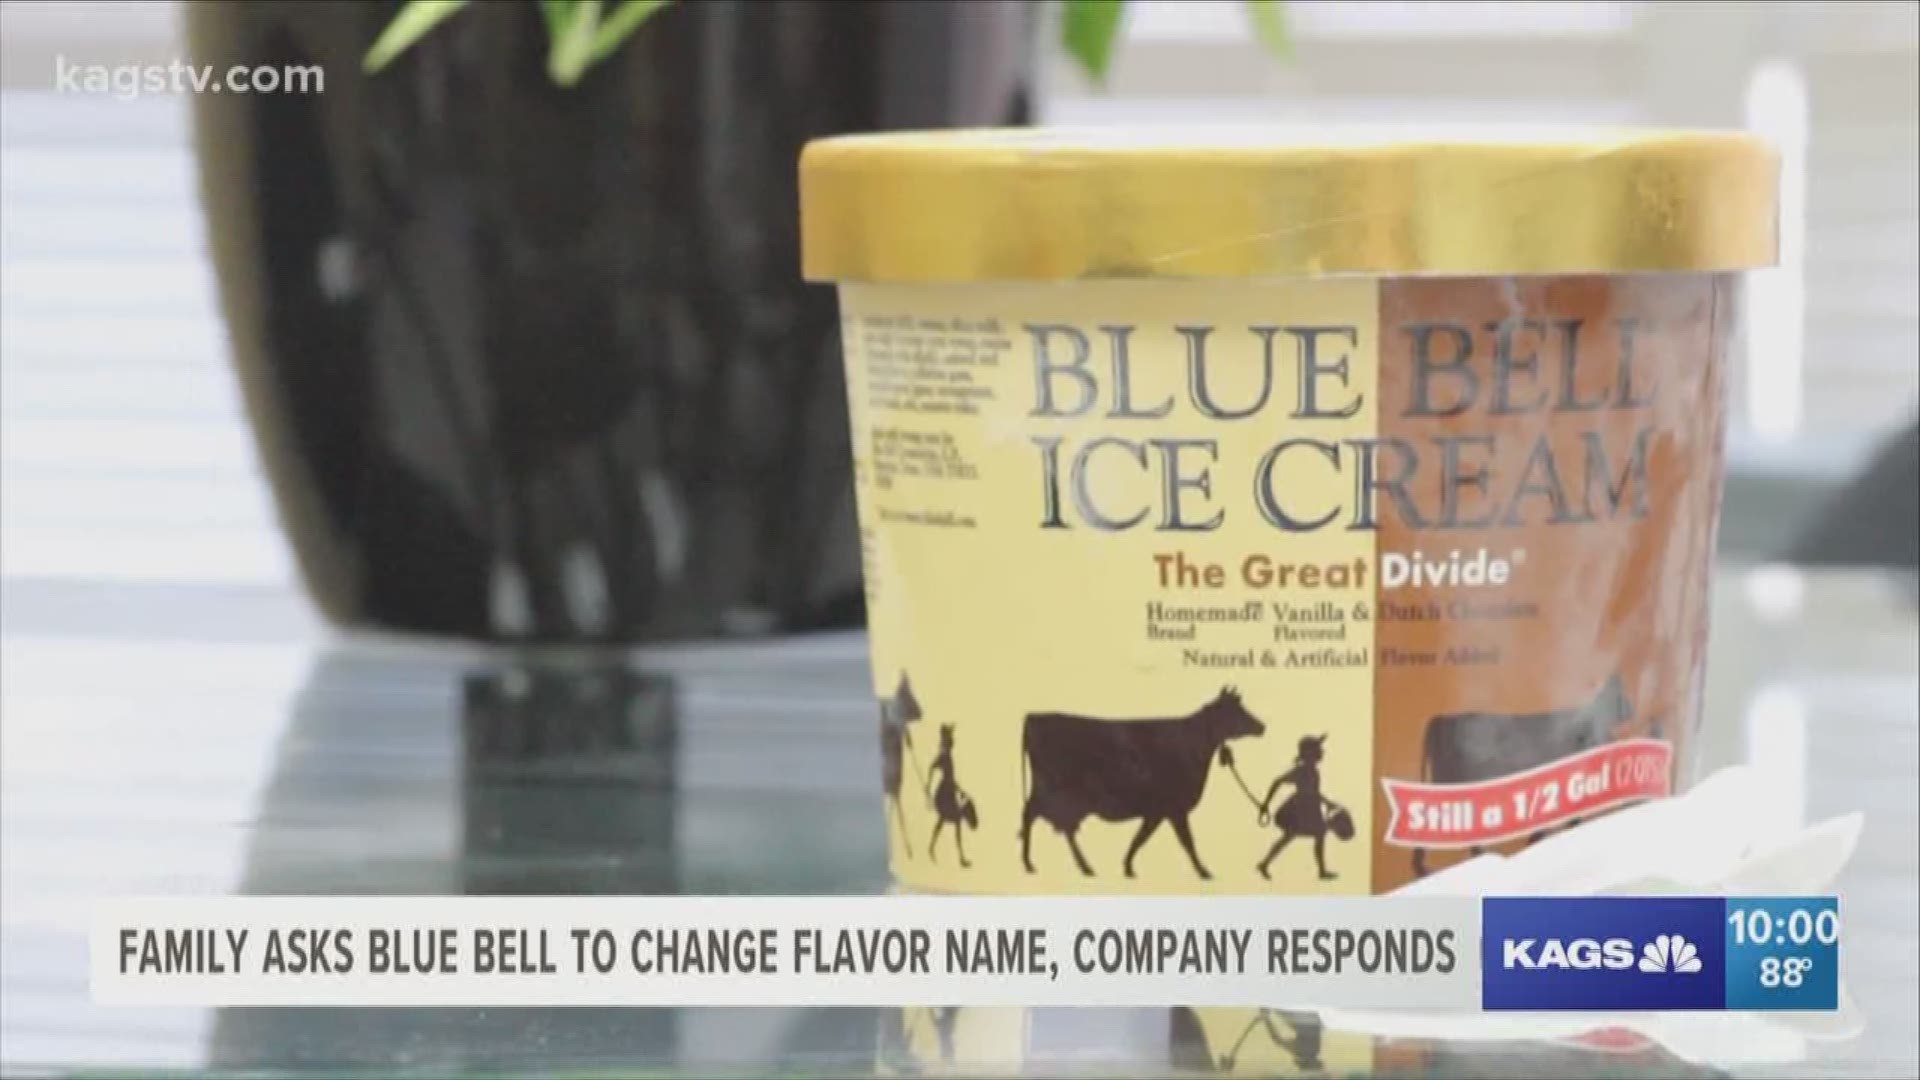 Louisiana asked Blue Bell to change name of "The Great Divide"